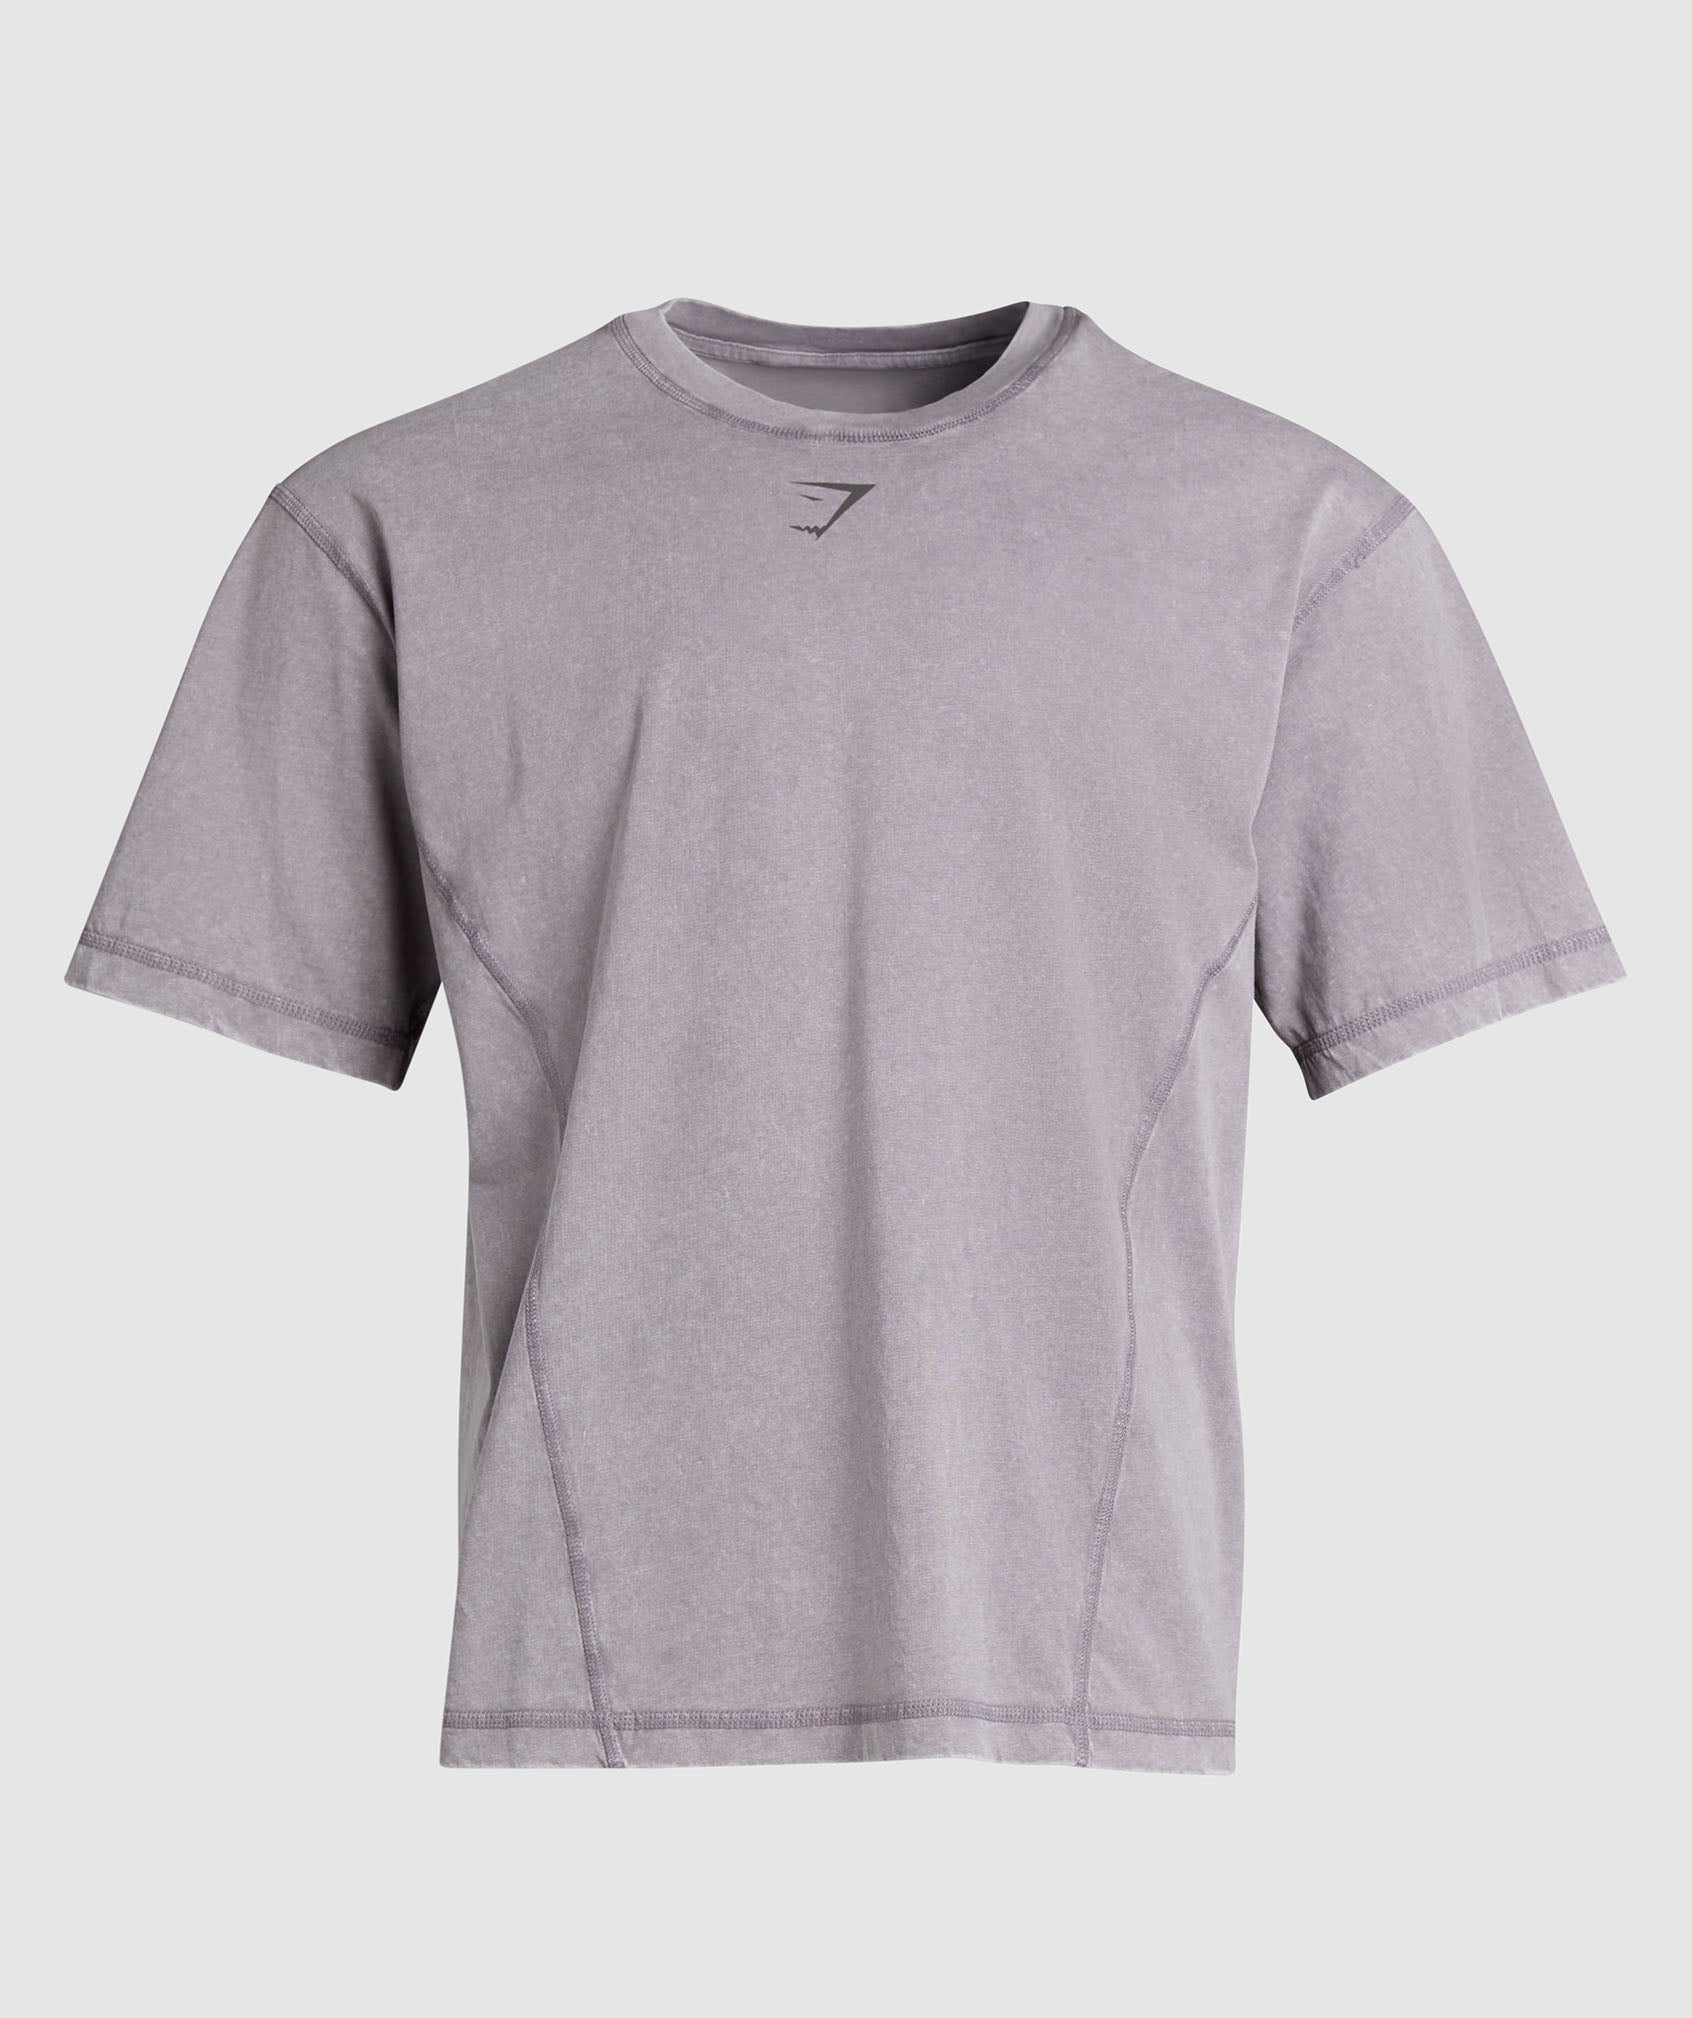 Heritage Washed T-Shirt in Fog Purple - view 7